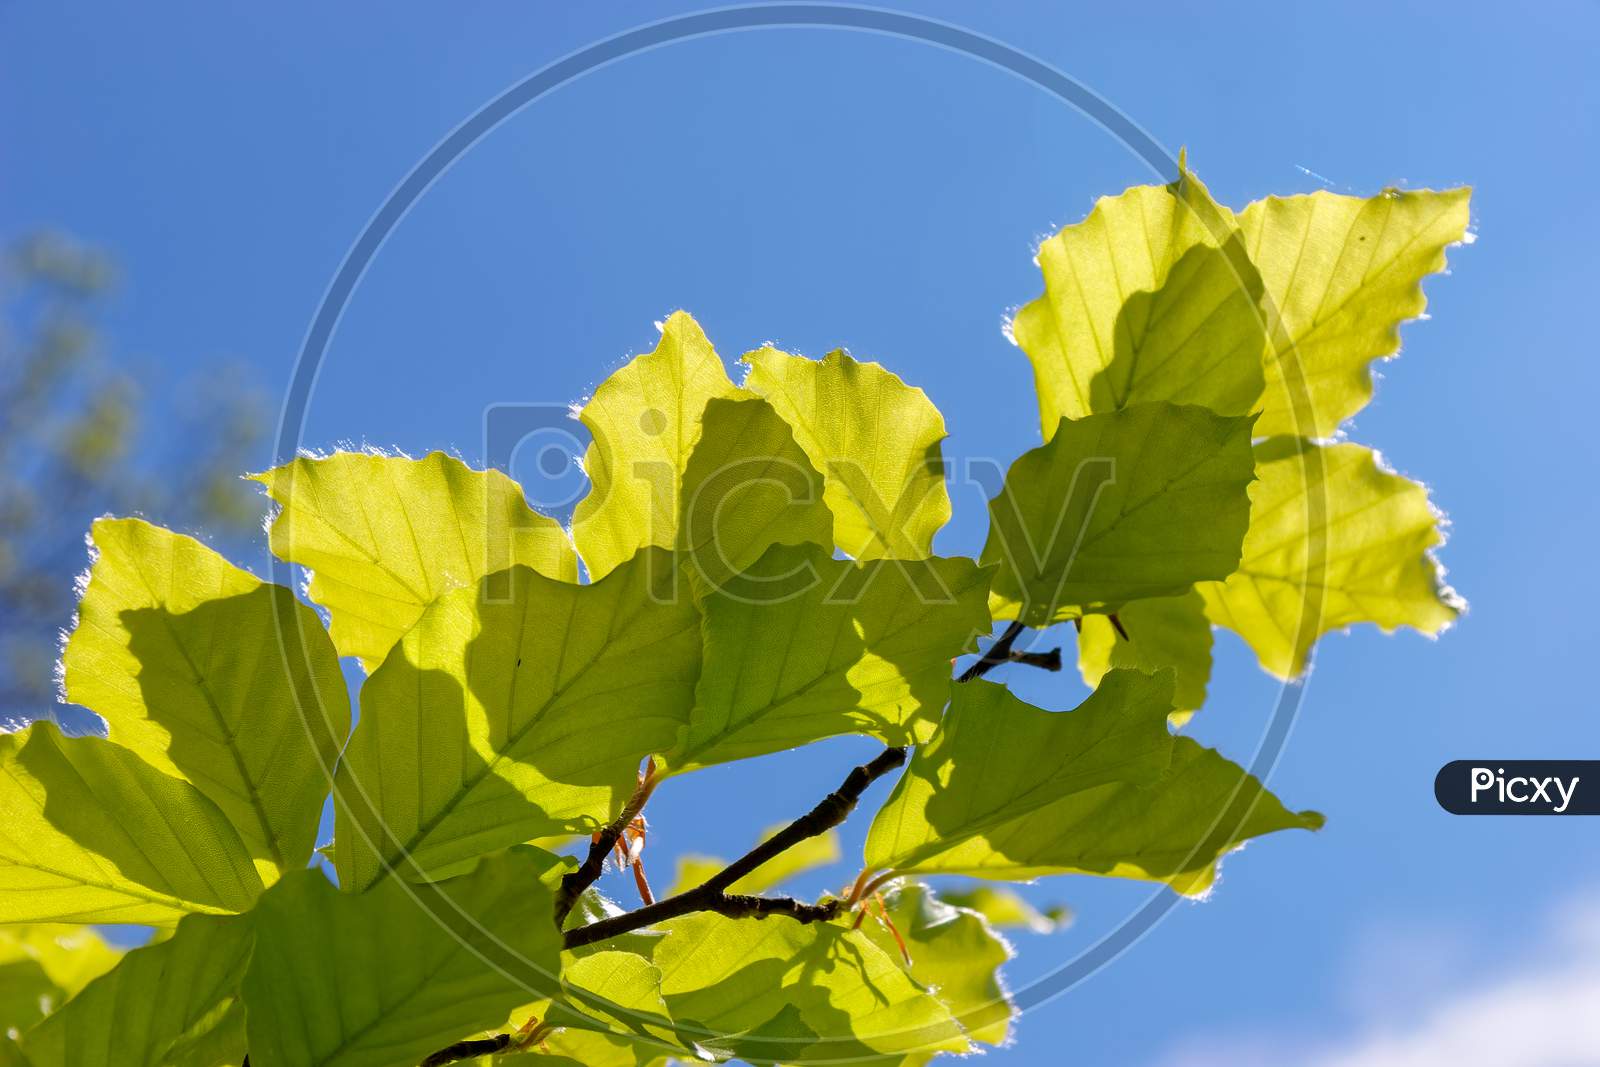 Close-Up Of Some Leaves Of A Beech (Fagaceae) Tree In An English Garden